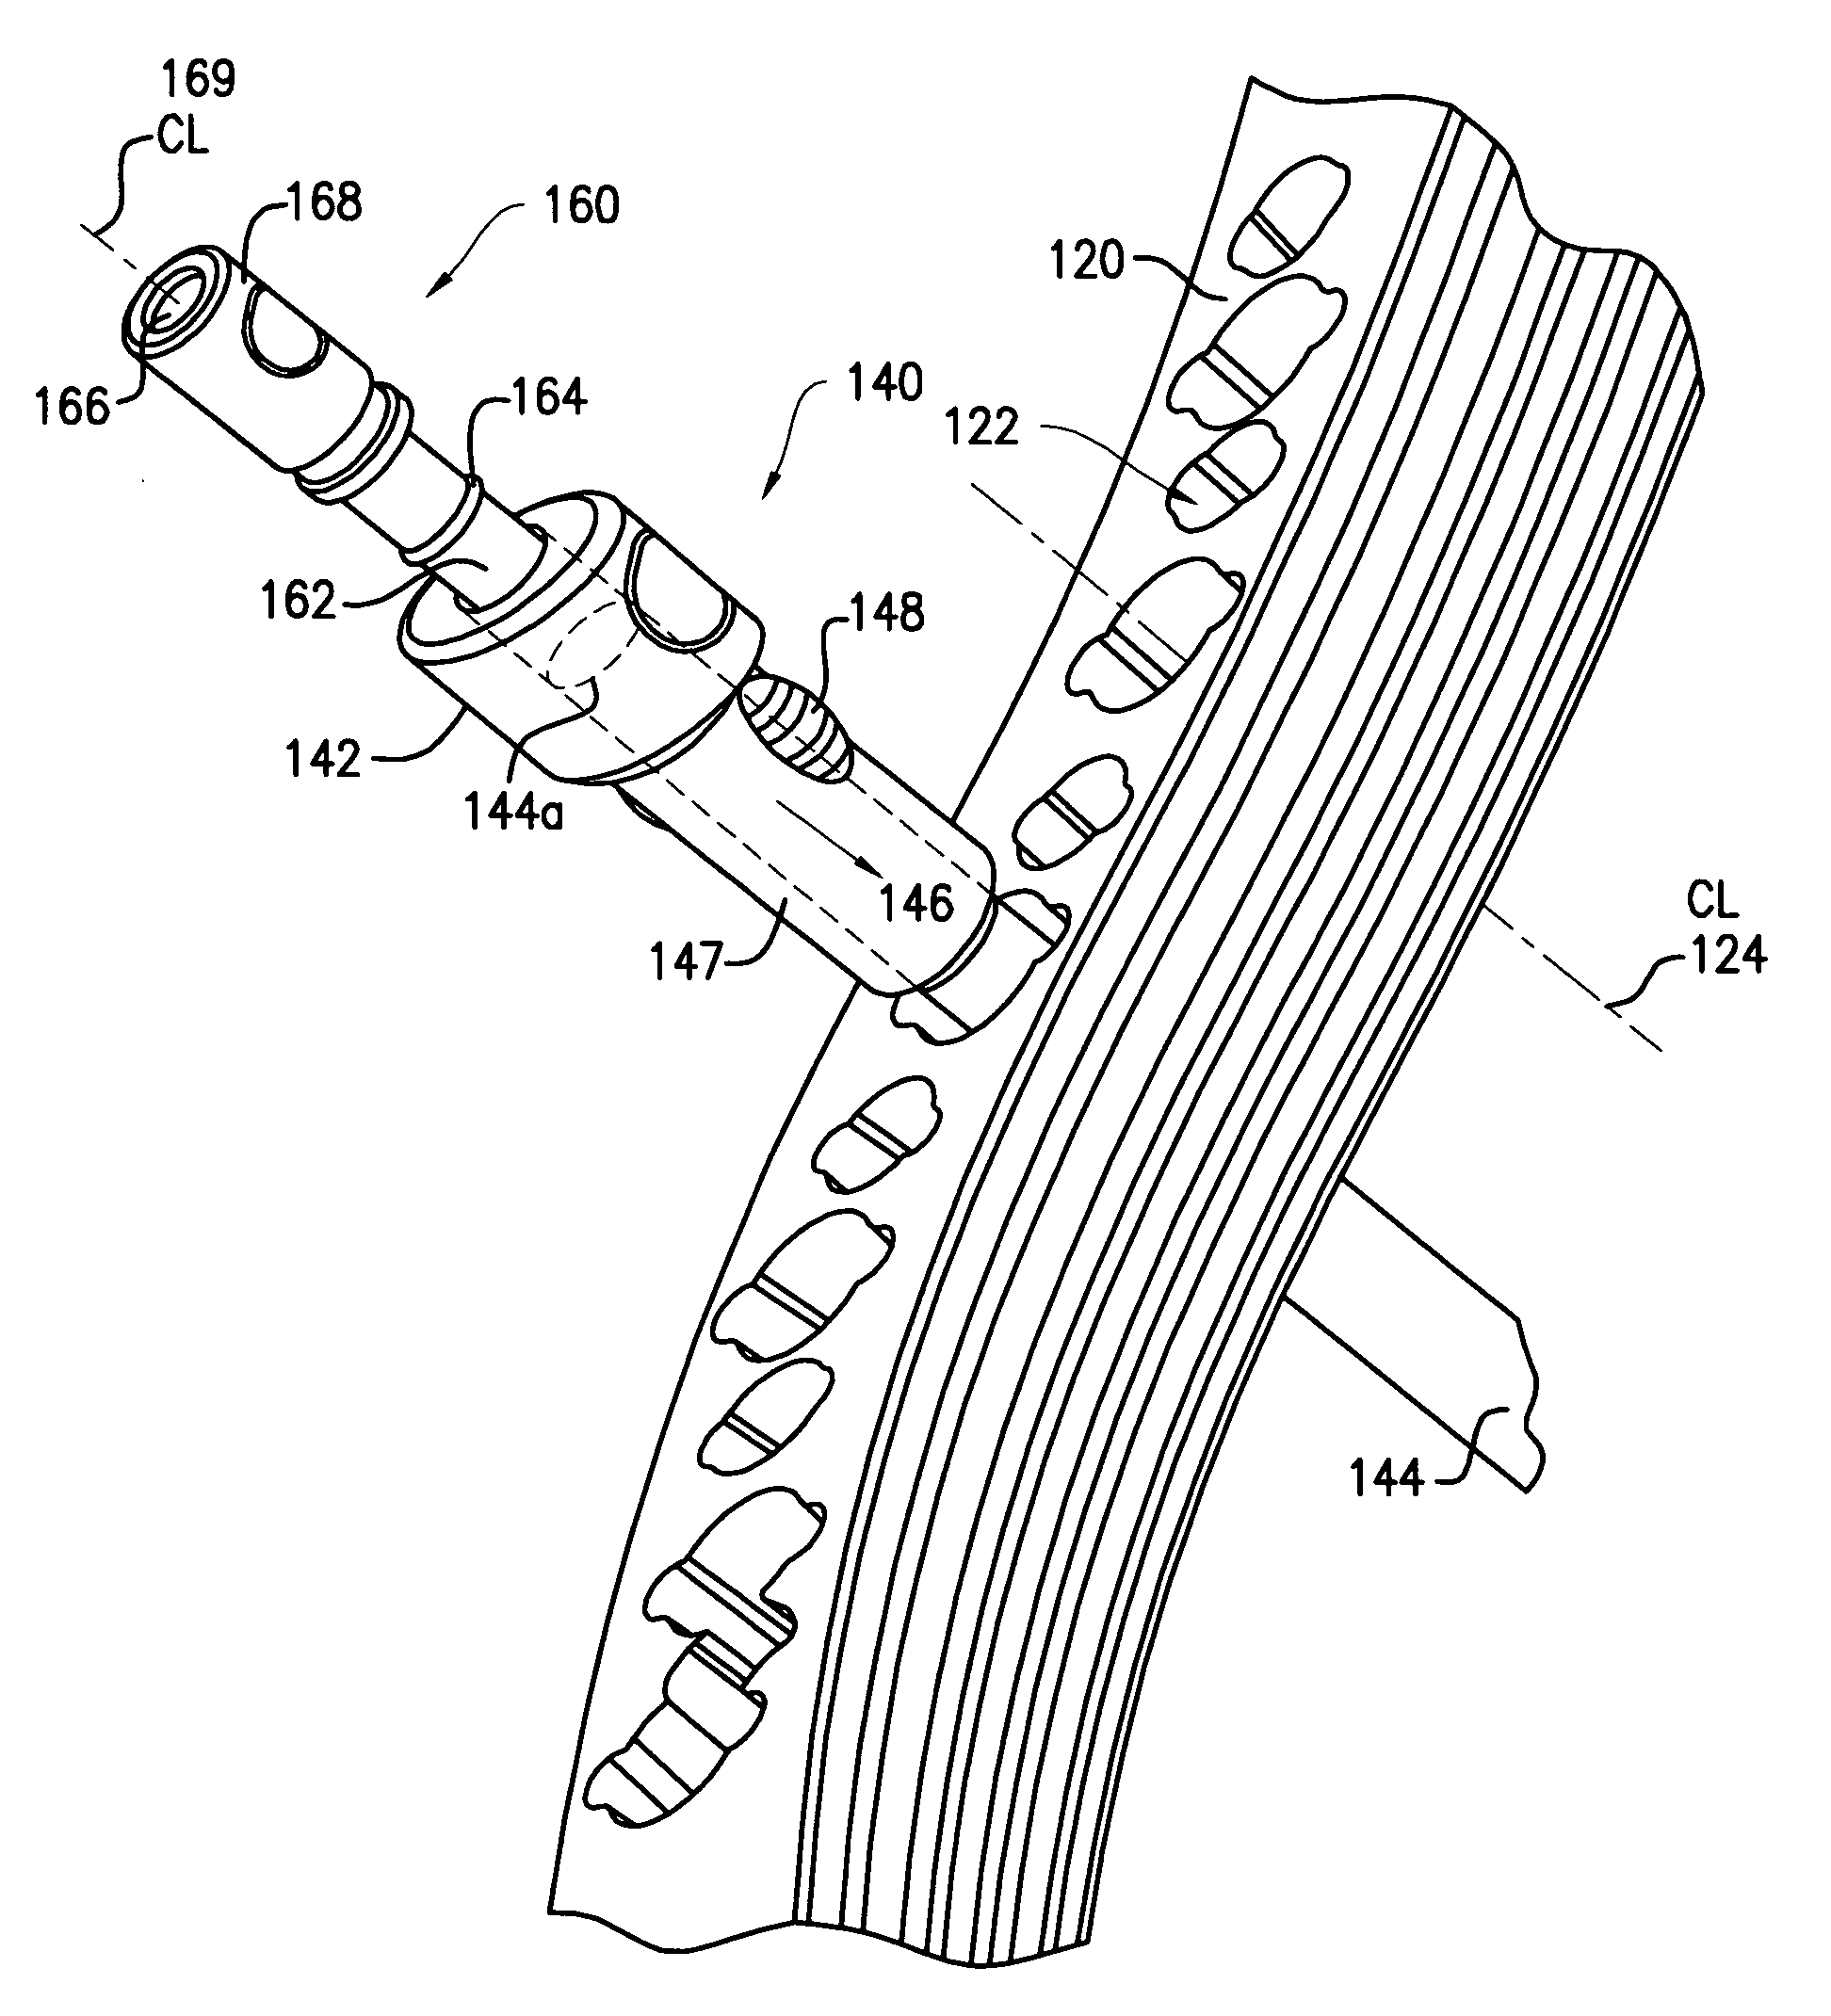 Drill alignment assembly for a bone plate using tissue protection sleeves that are fixed in the bone plate